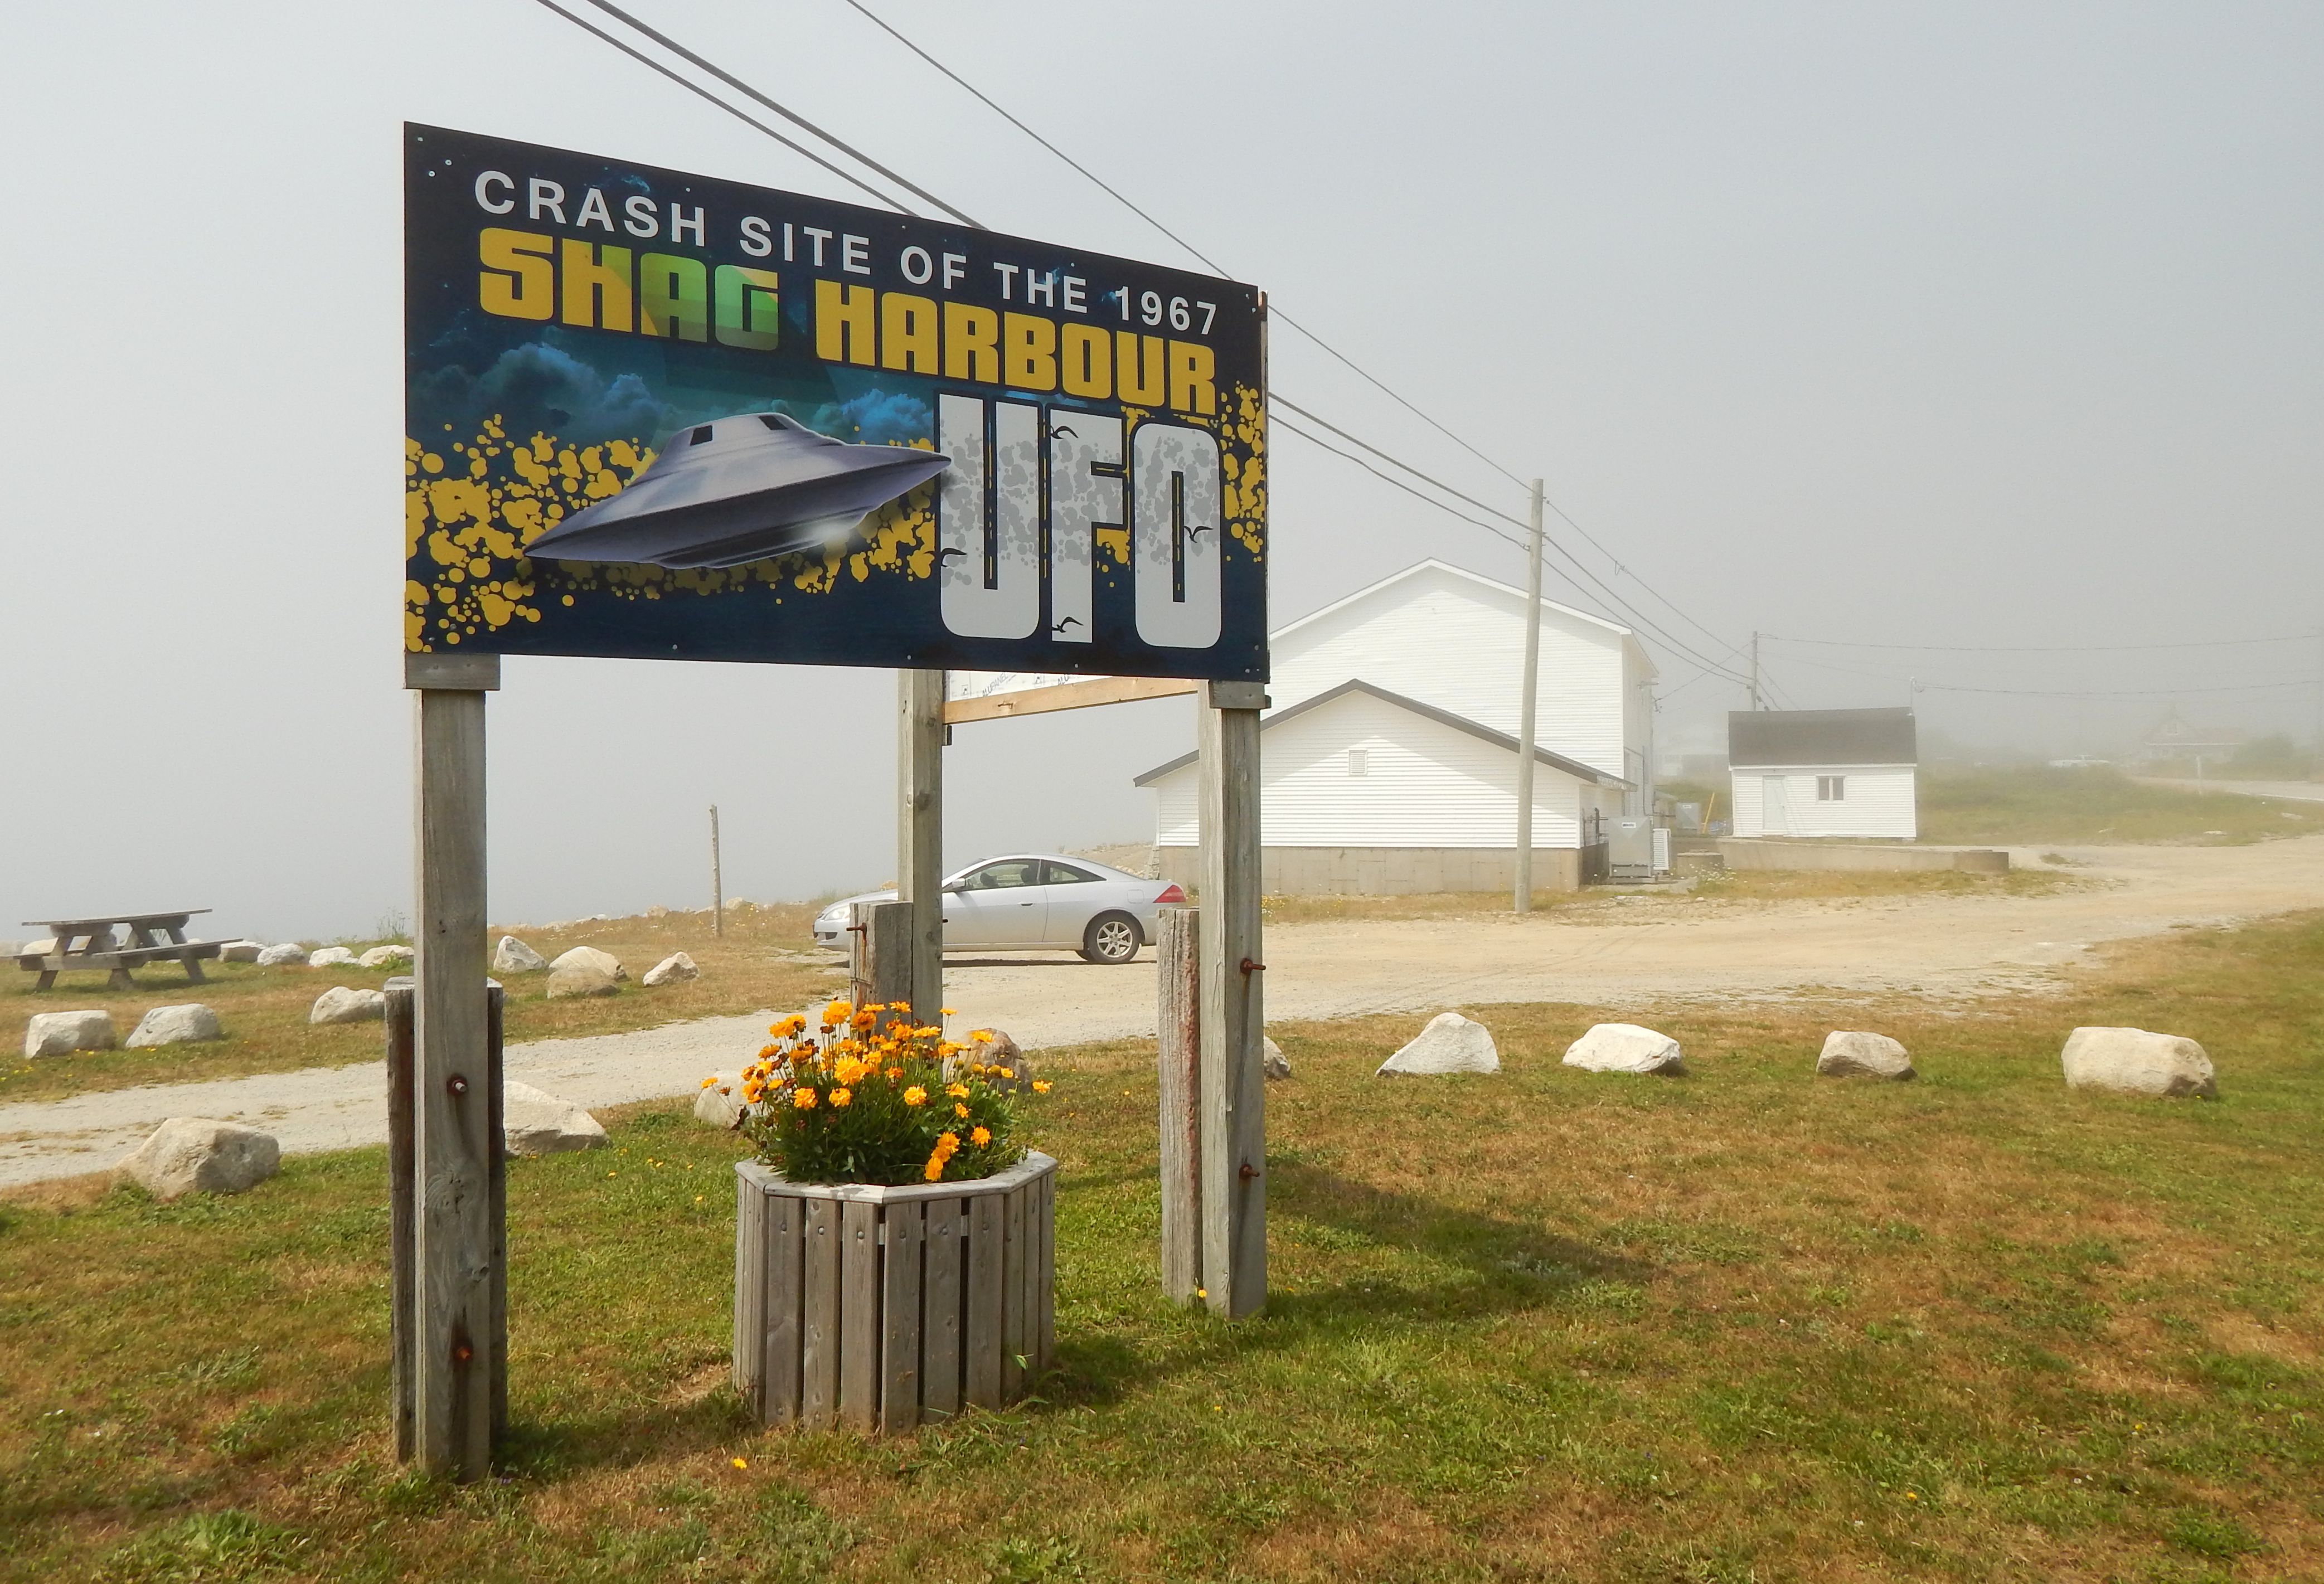 The site of the 1967 Shag Harbour UFO incident, a couple of kilometres down the road from the UFO Centre.